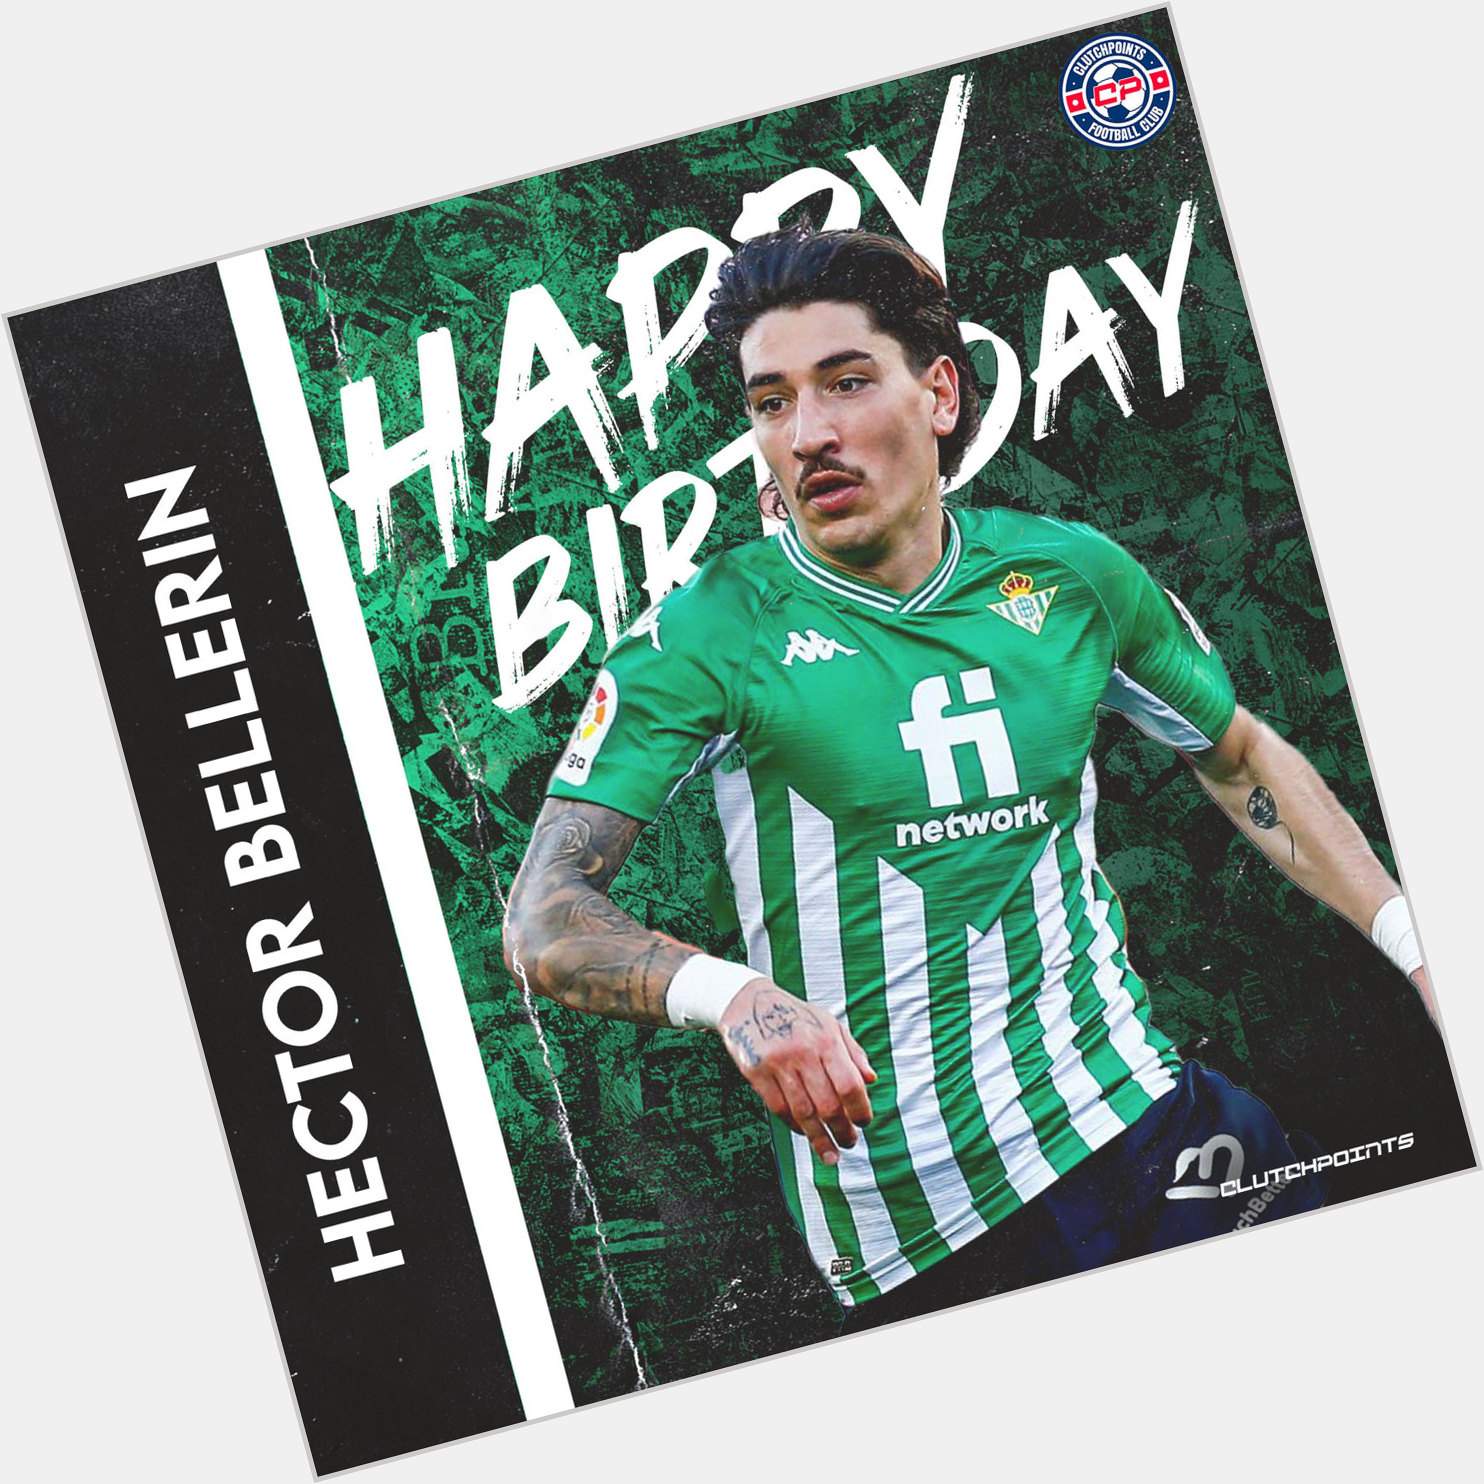 Football fans, join us in wishing Hector Bellerin
a happy 29th birthday! 